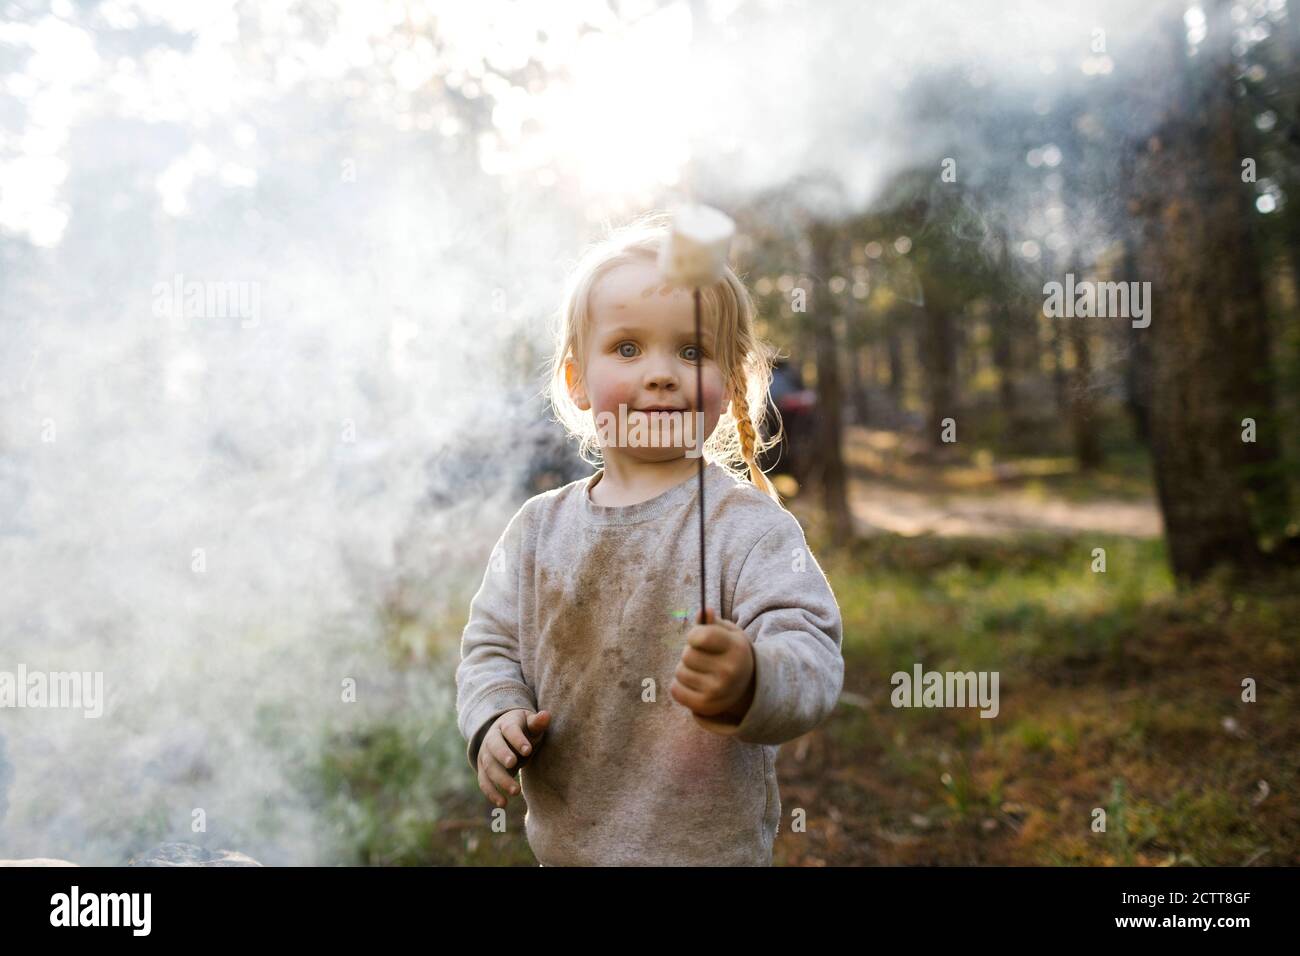 Portrait of girl (2-3) Holding Marshmallow in der Nähe Lagerfeuer im Wald, Wasatch Cache National Forest Stockfoto